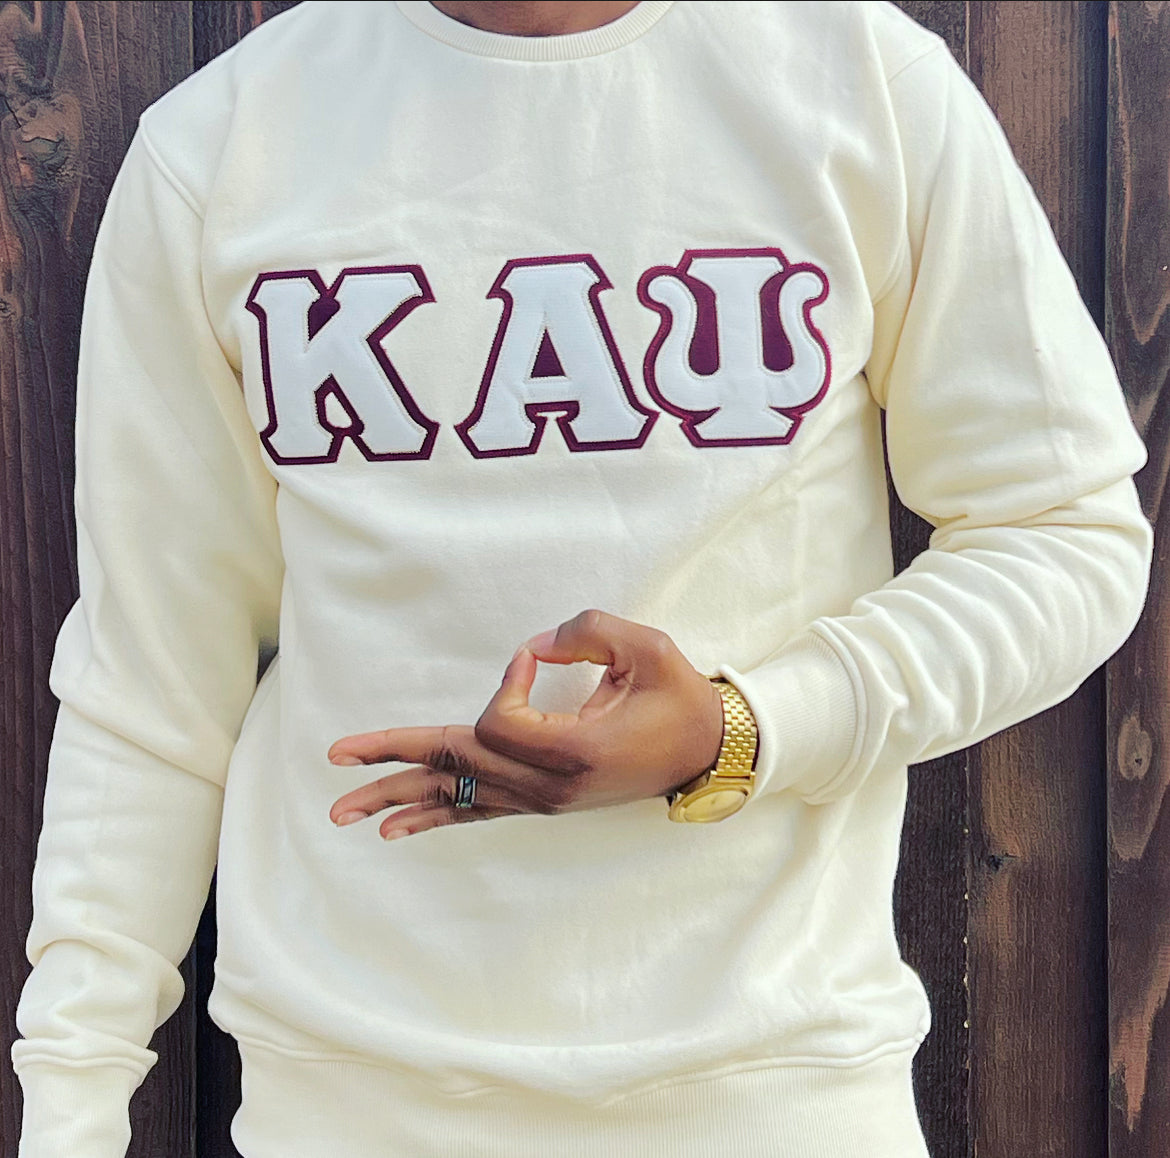 Exclusive Kappa Alpha Psi Double Stitched Appliqué Embroidery Lettered Cream Sweater. This is the perfect long-sleeved Sweater to wear while showing off your Kappa Alpha Psi fraternity lettering. A comfortable 100% cotton tee with a twill Greek letters embroidery across the chest give you the perfect fit. This sweater is also a perfect gift for your favorite Kappa Man.